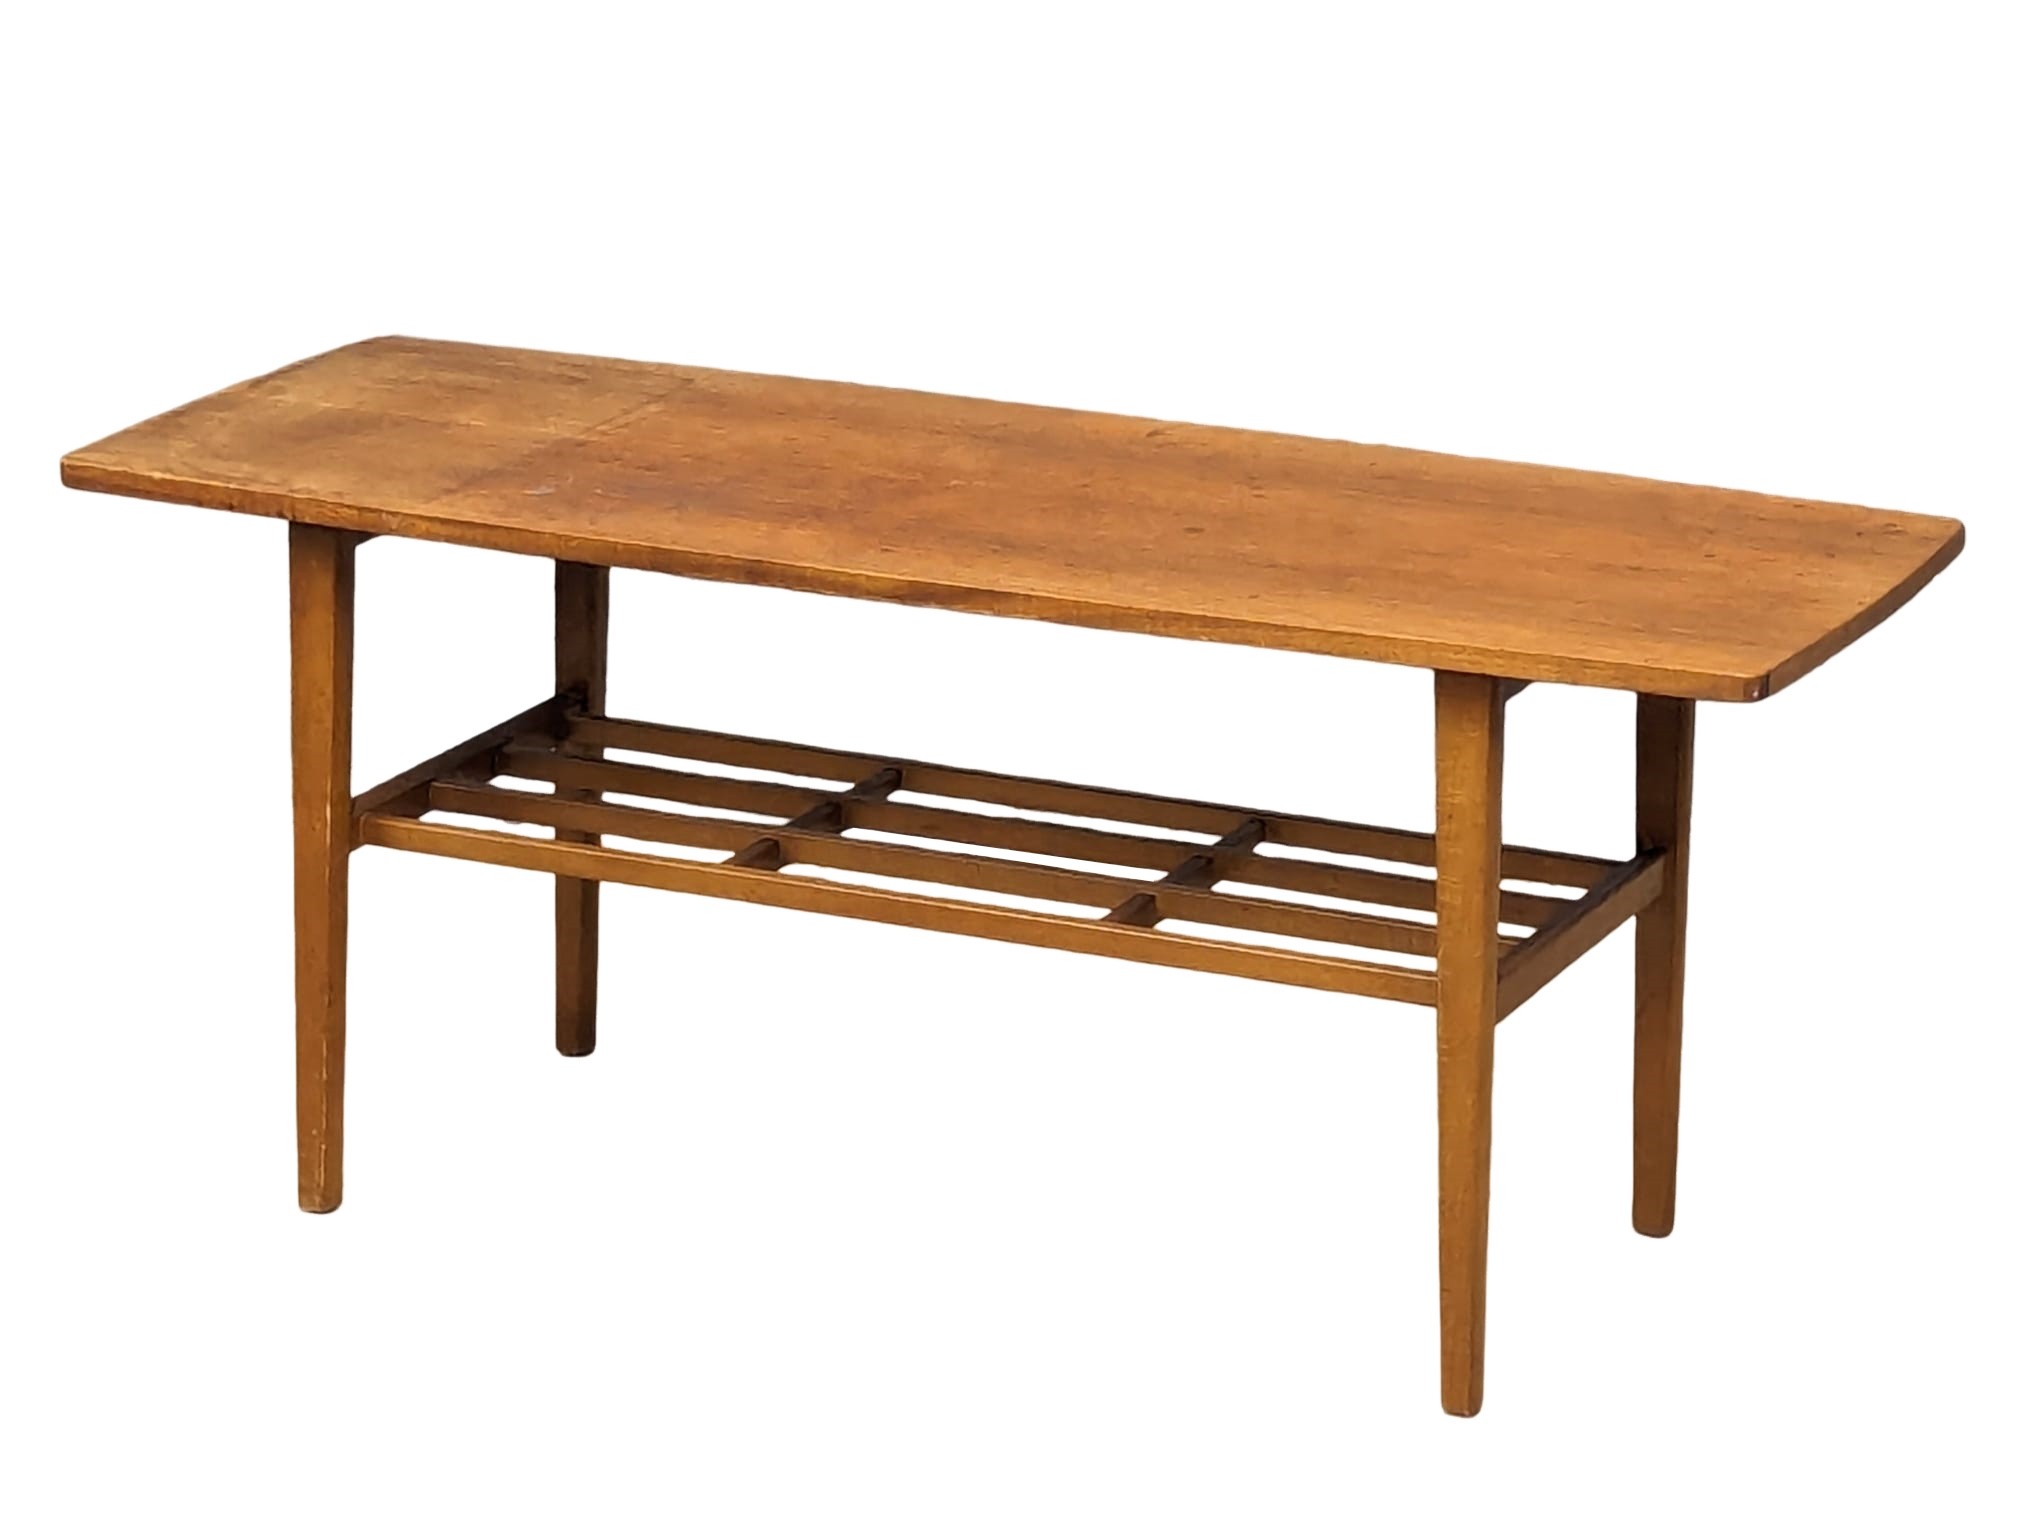 A Mid Century teak 2 tiered coffee table by Nathan. 107x40.5x45.5cm